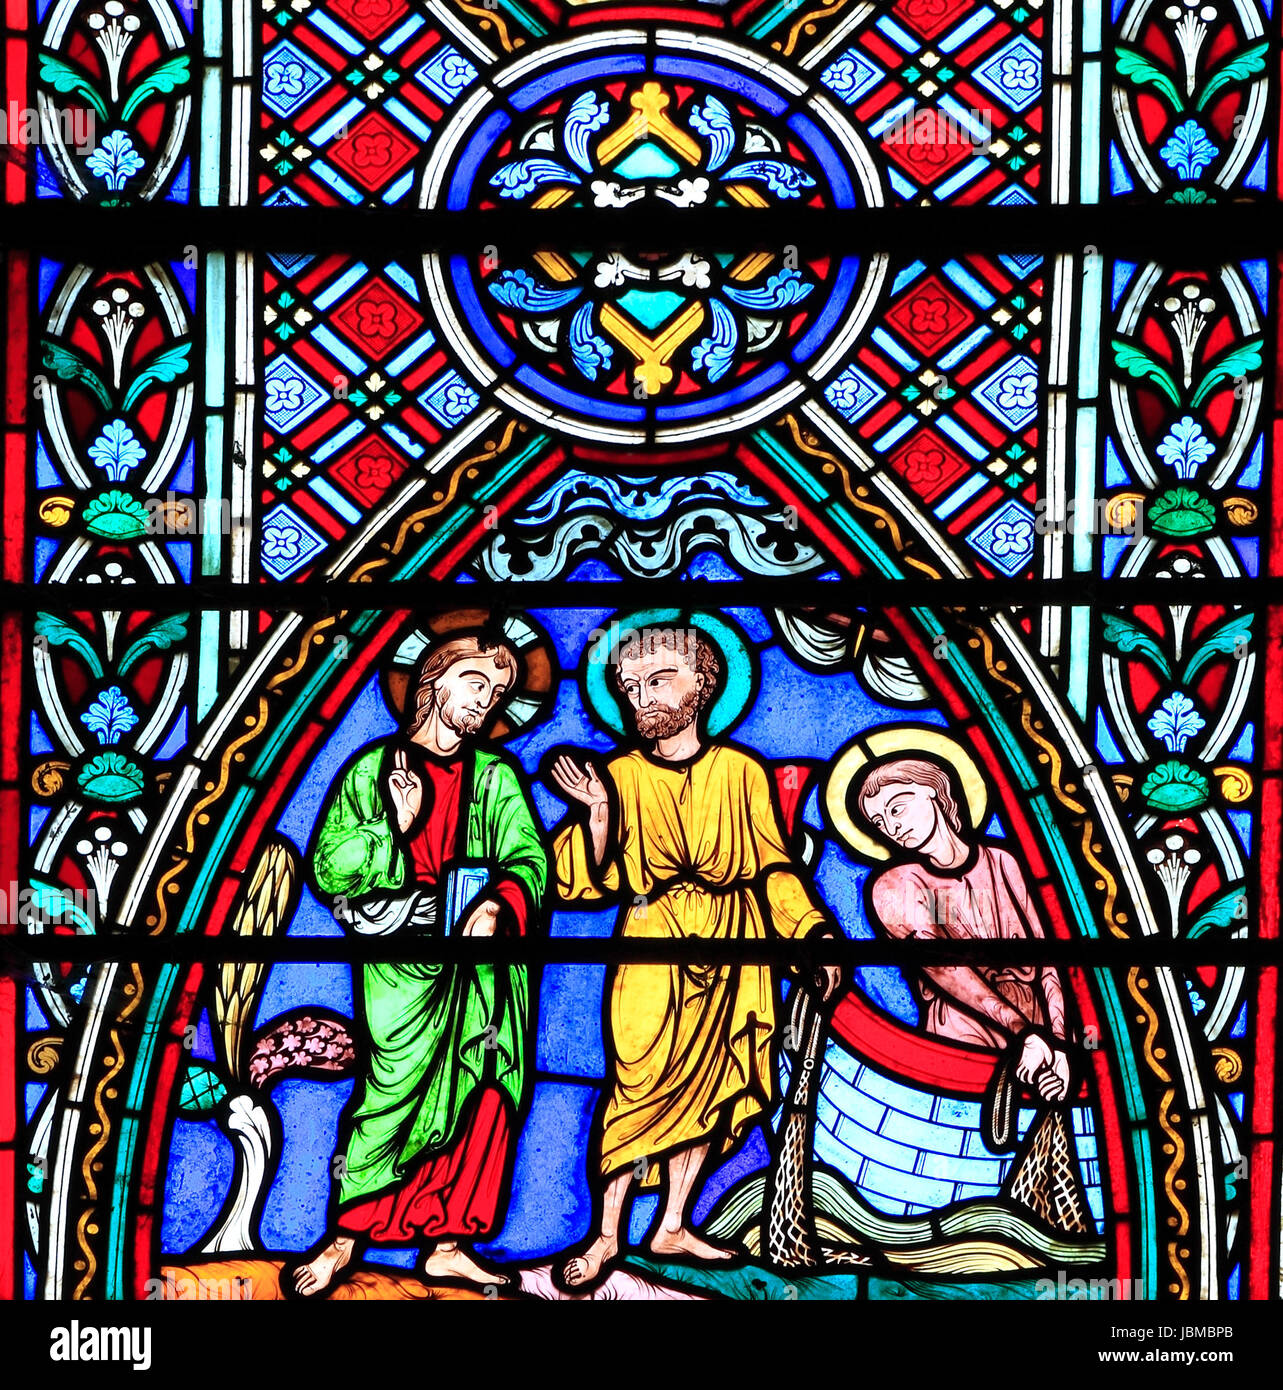 Life of Jesus window, Feltwell church, stained glass by Didron of Paris, 1859, Jesus with apostles Peter and Andrew, casting fishing net in Sea o Stock Photo